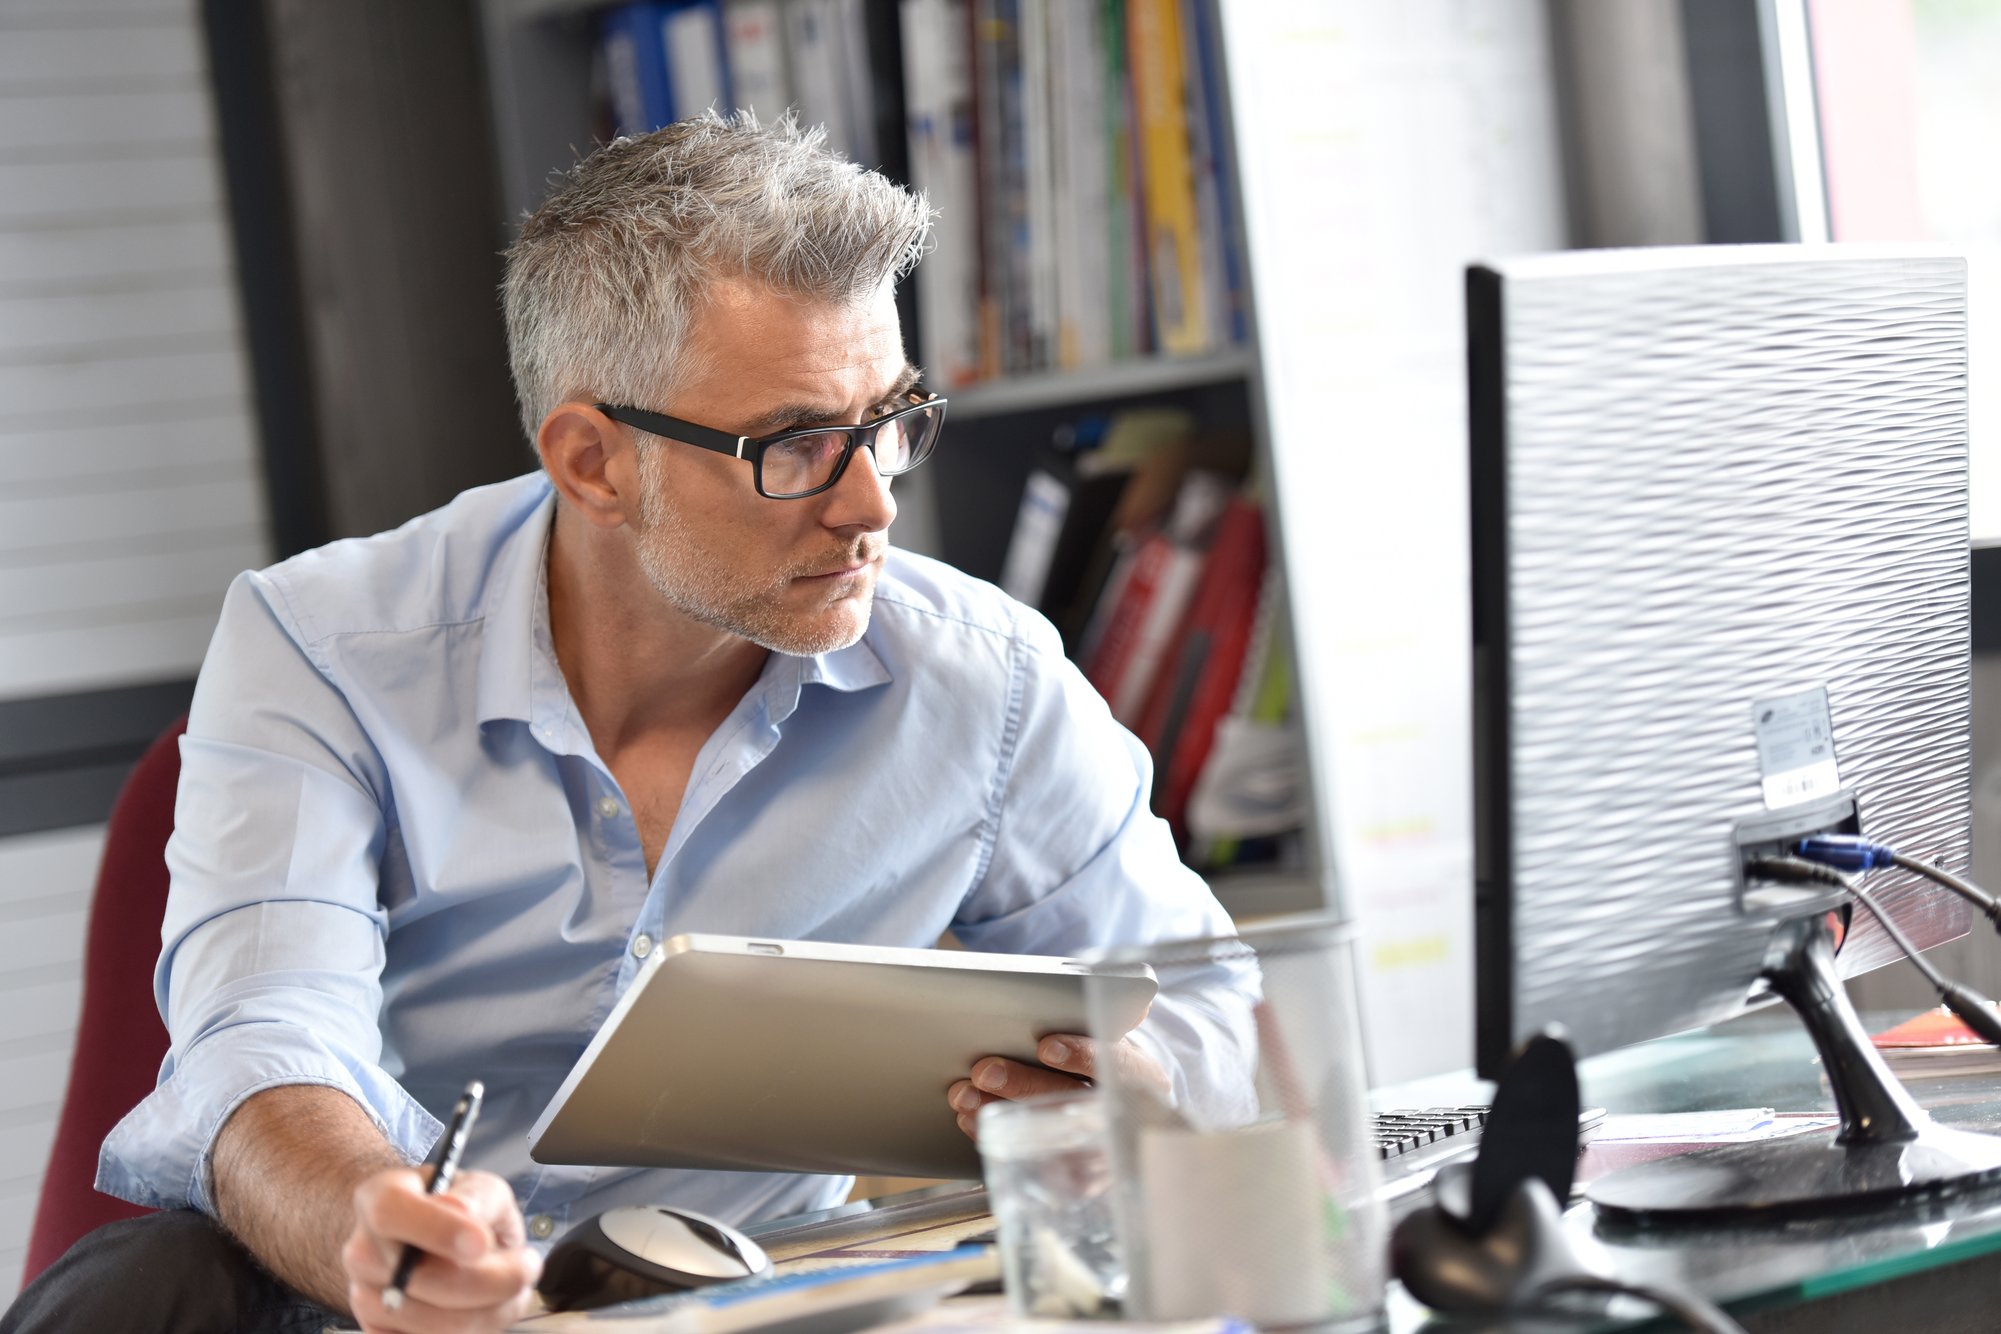 Middlle age business man with glasses and grey hair, holding a tablet and looking at laptop. 